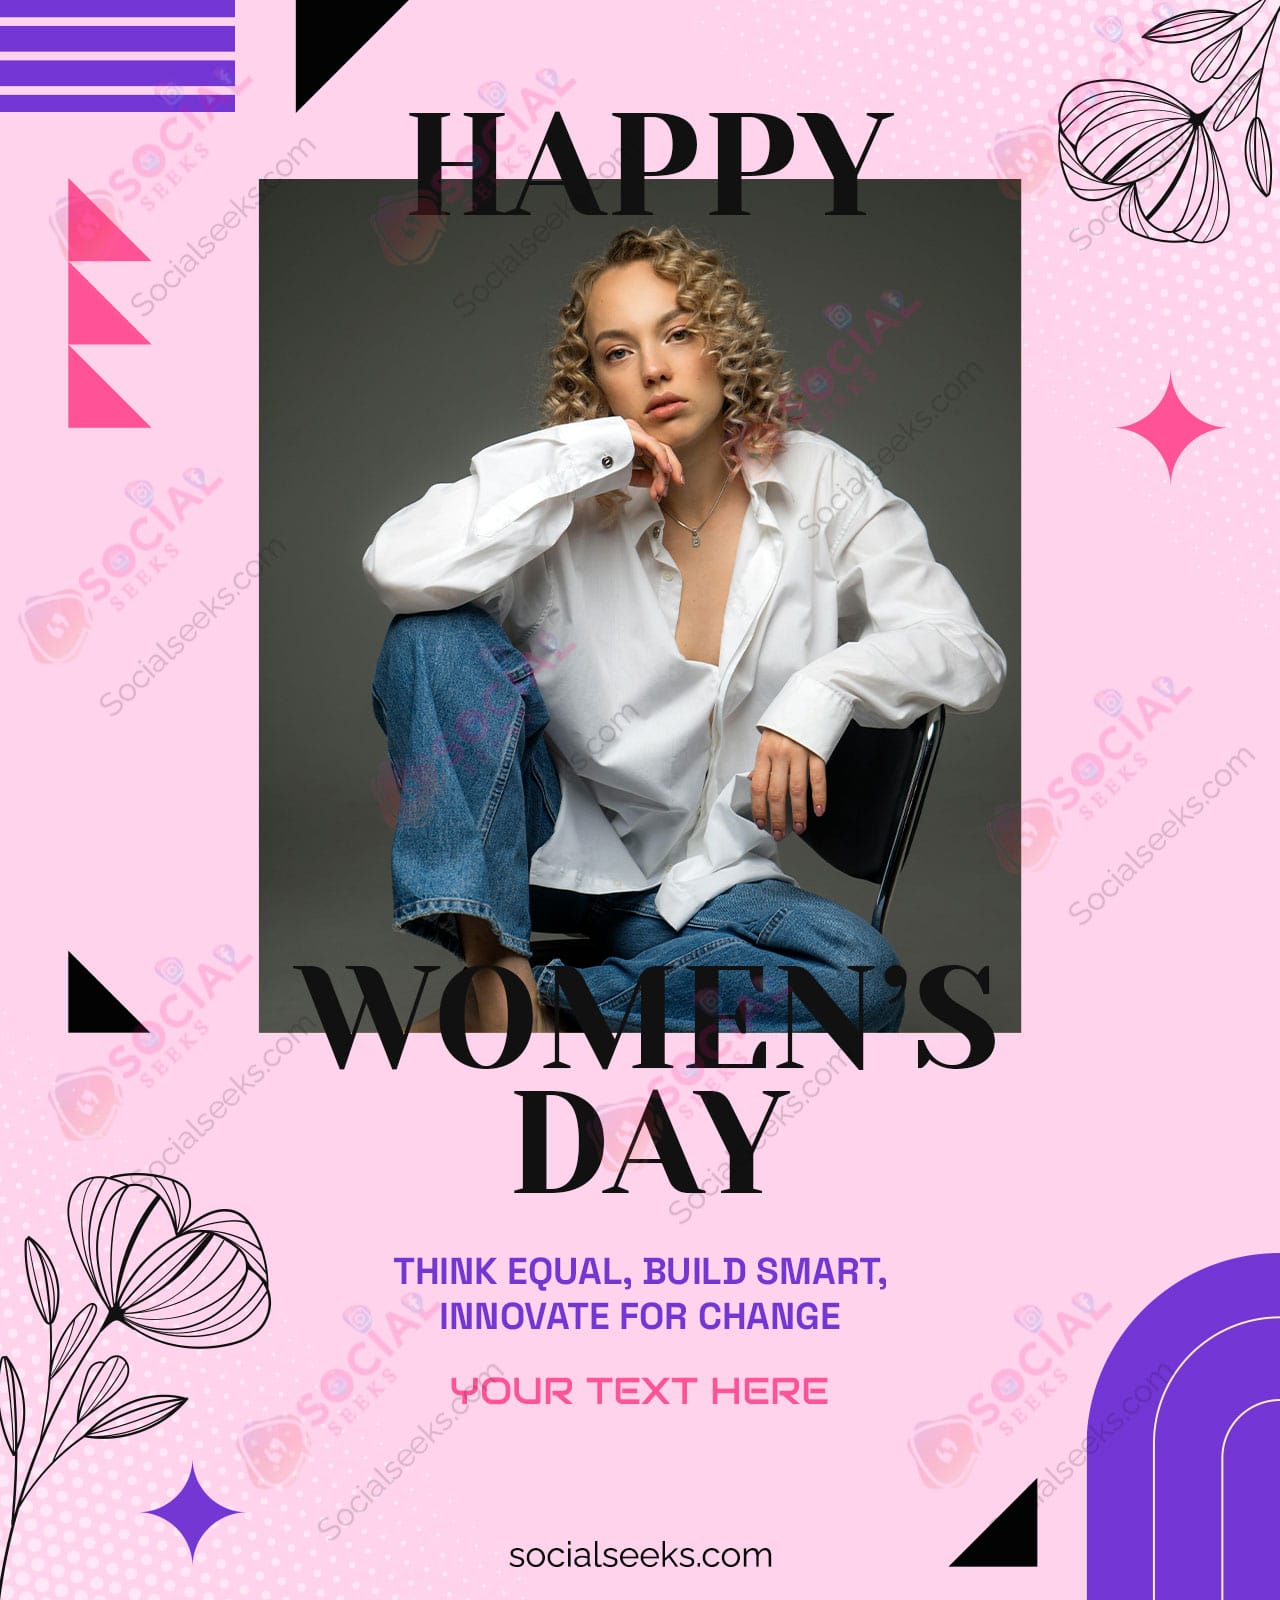 Free Customize Women’s Day Greetings Card With Name & Photo